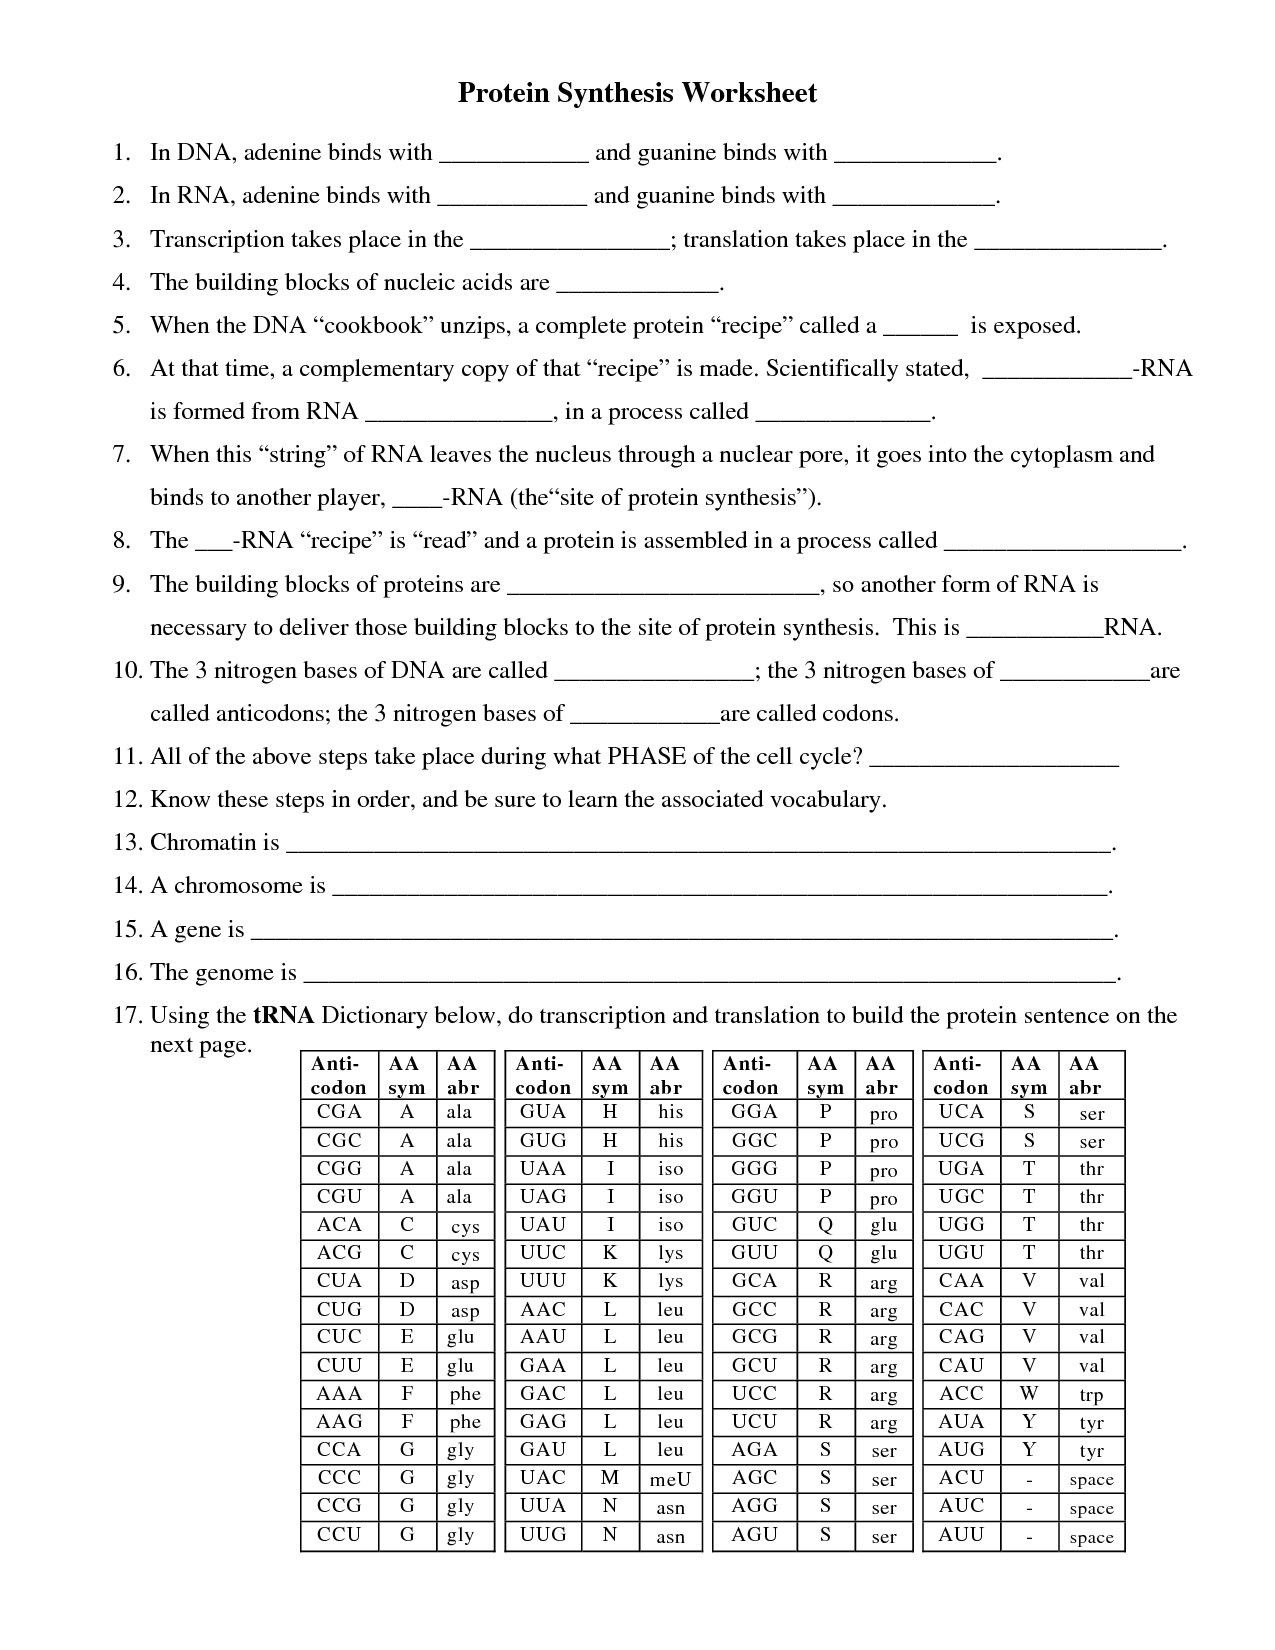 Protein Synthesis Review Worksheet Prime Dna and Protein Synthesis Worksheet Answers